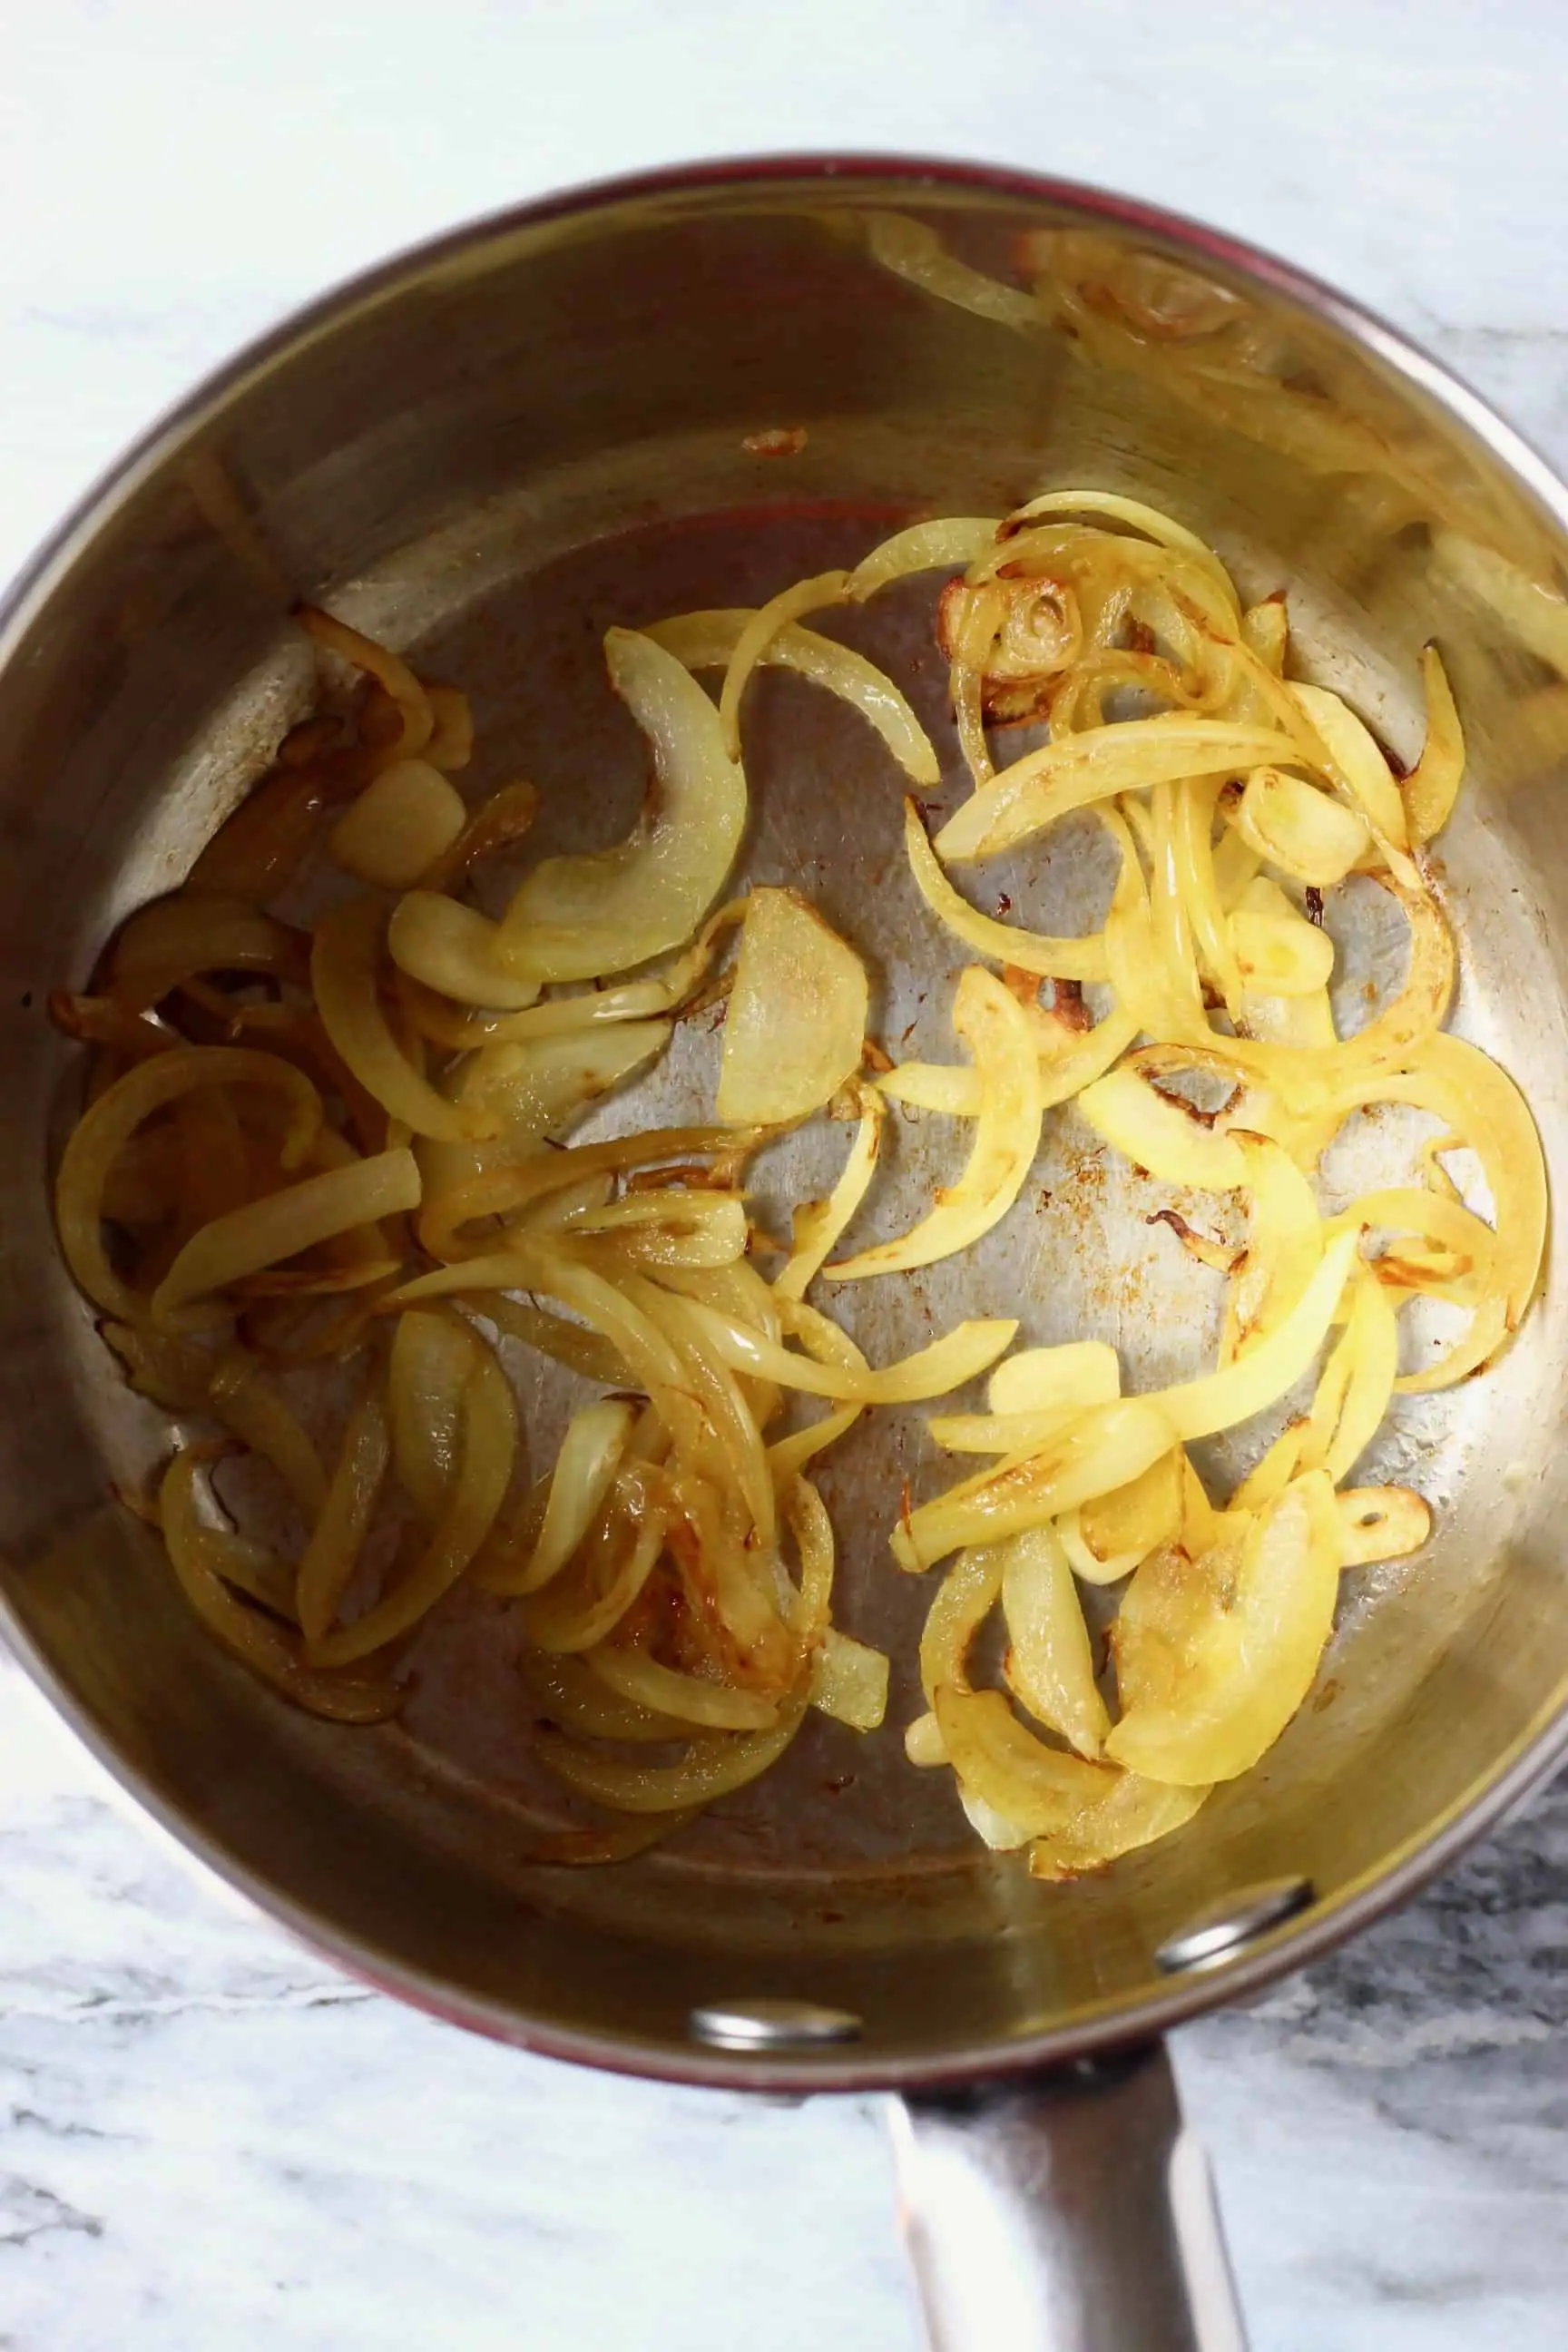 Sliced onion and garlic being fried in a silver saucepan